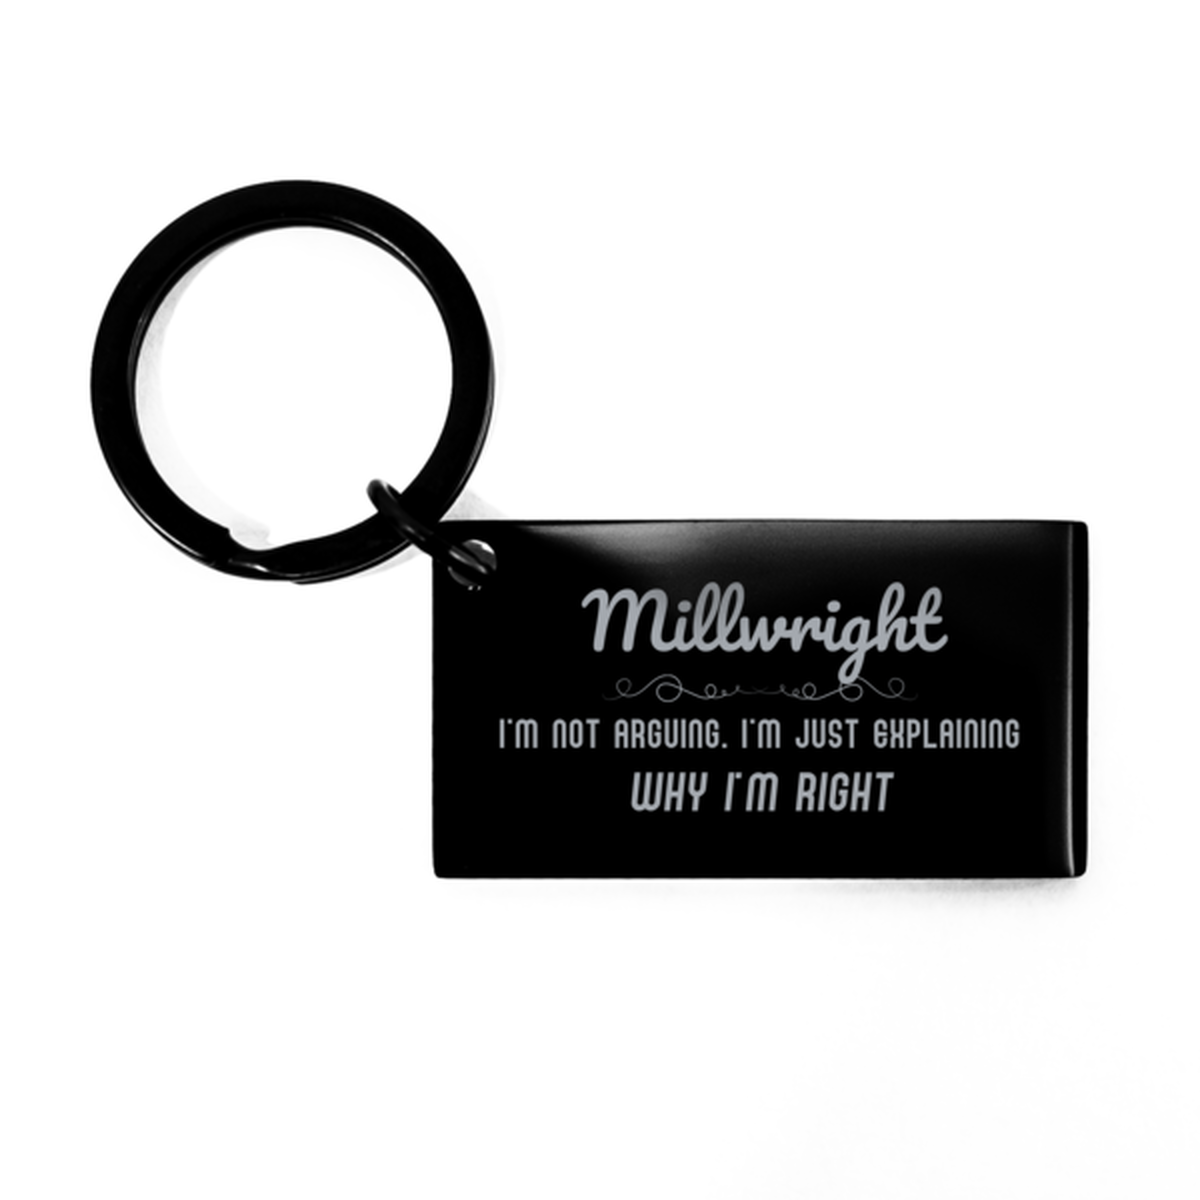 Millwright I'm not Arguing. I'm Just Explaining Why I'm RIGHT Keychain, Funny Saying Quote Millwright Gifts For Millwright Graduation Birthday Christmas Gifts for Men Women Coworker